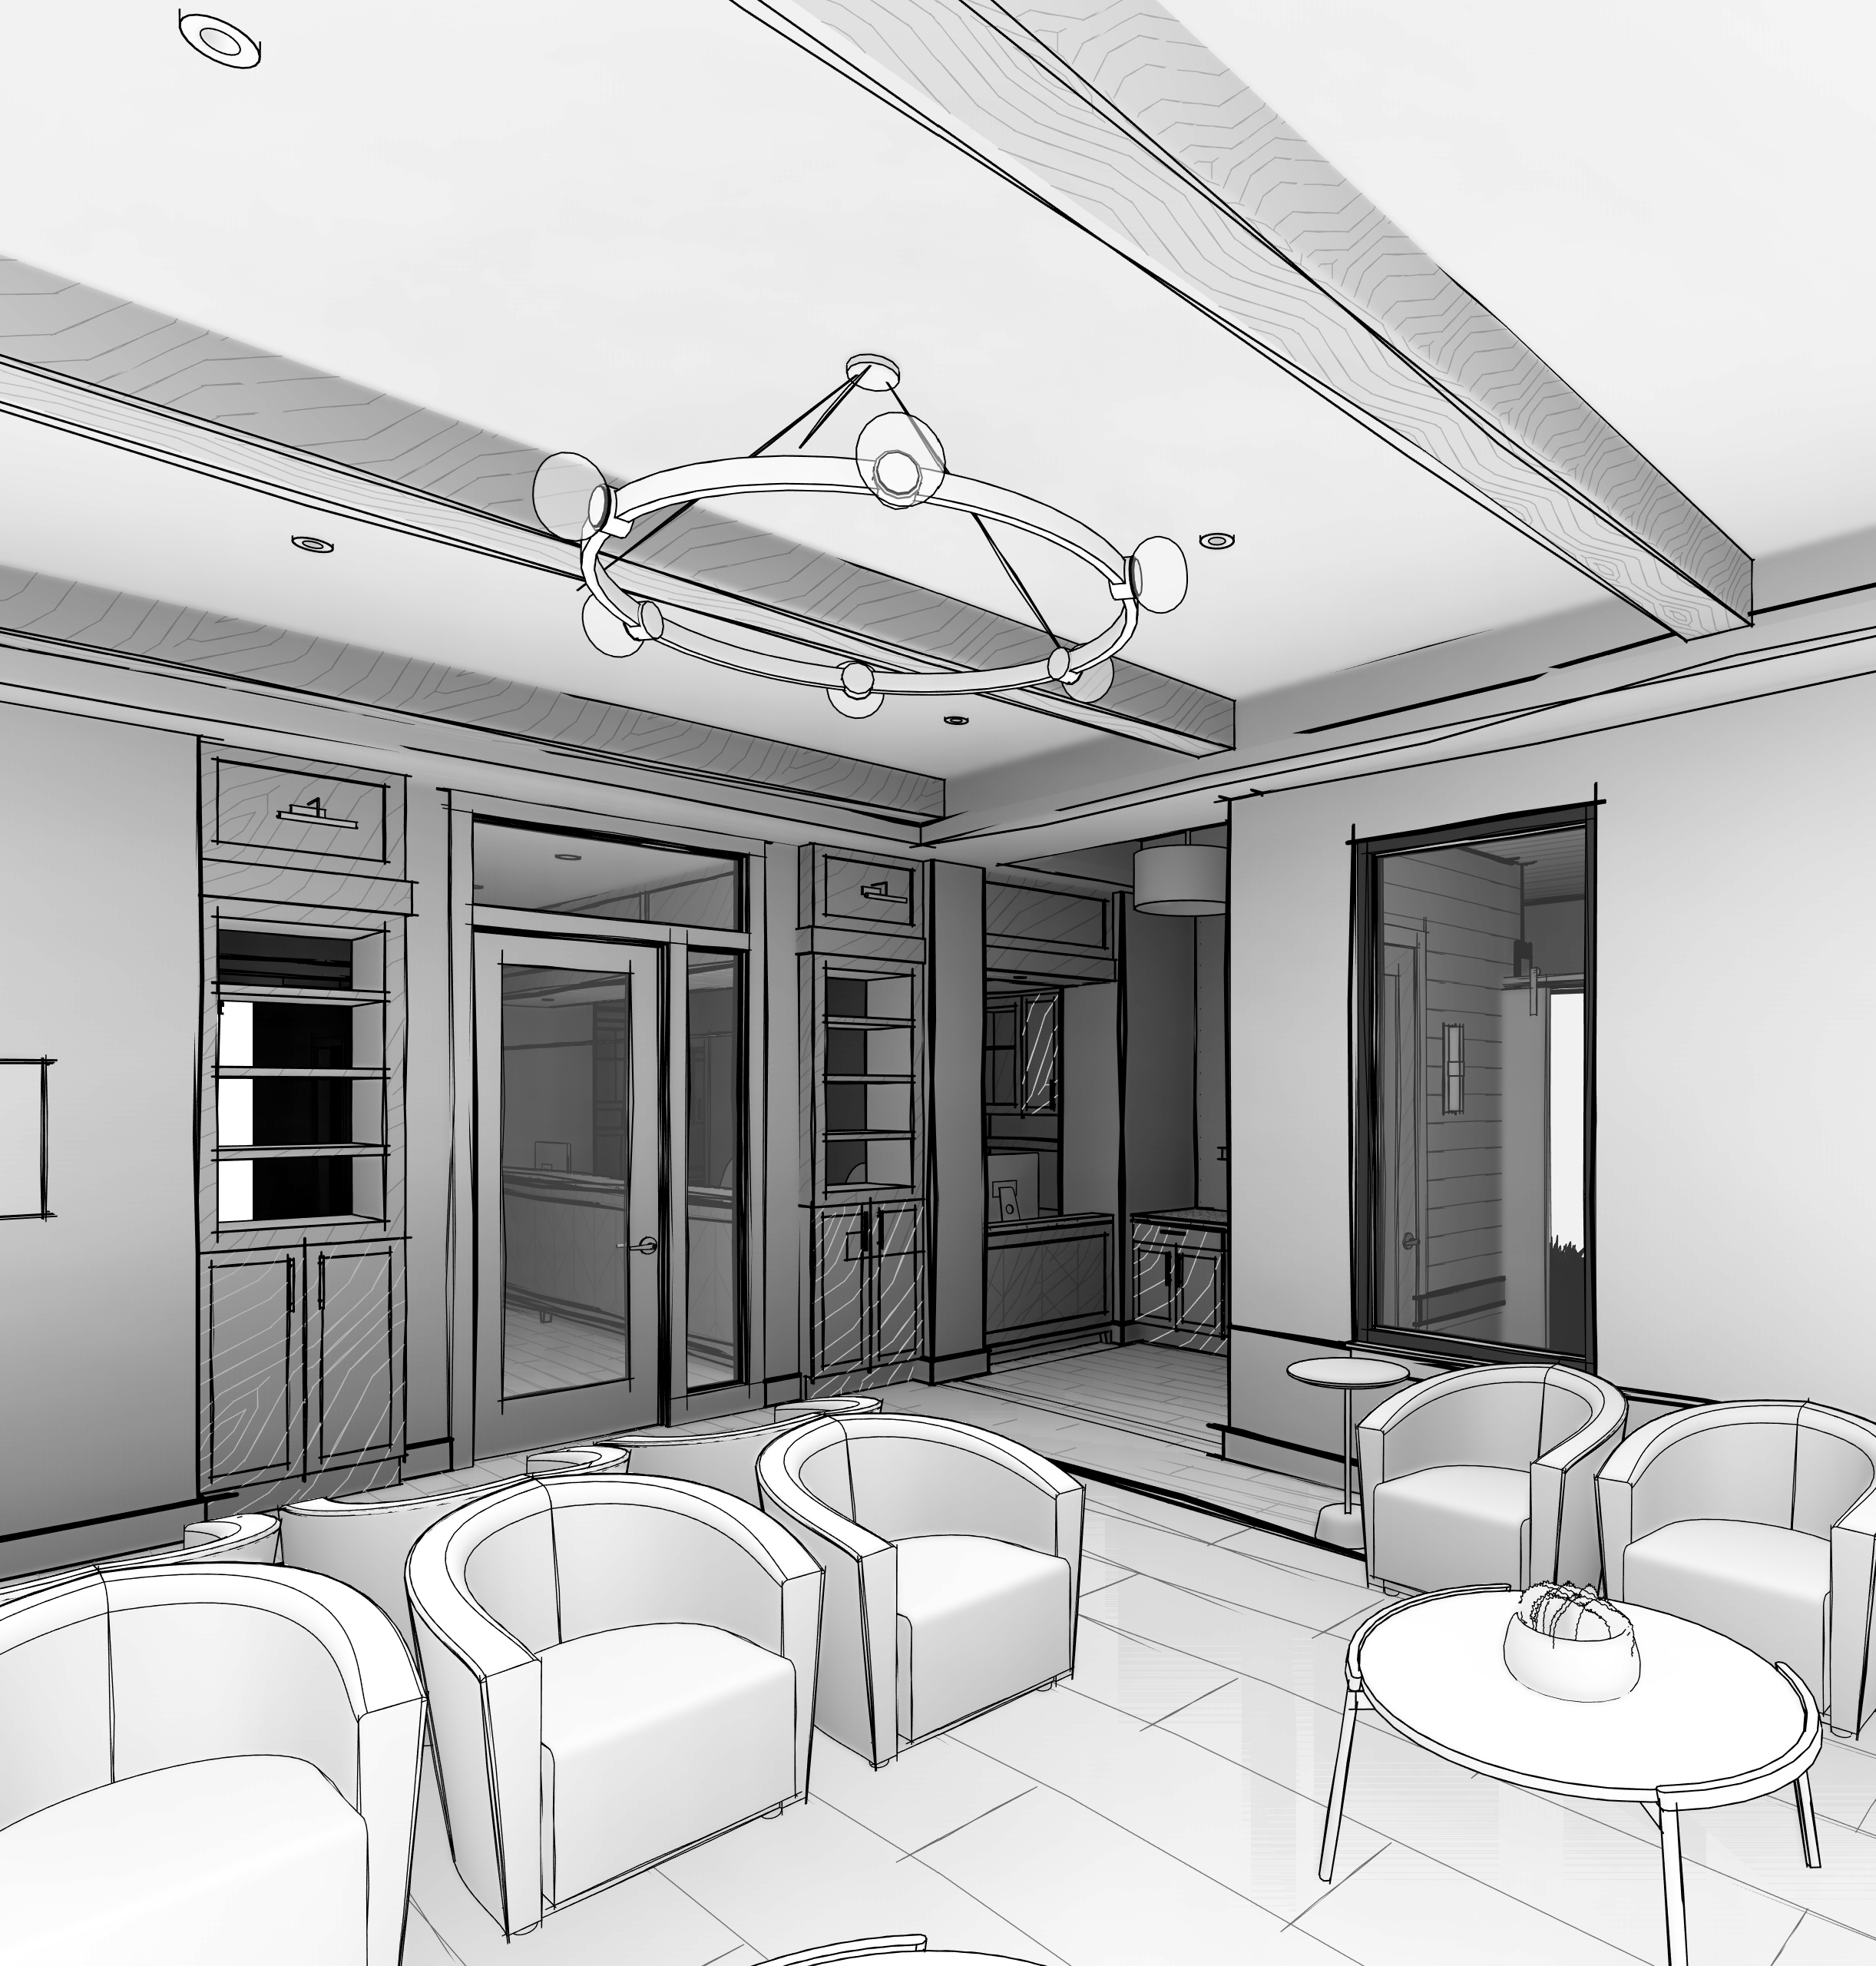 La Vernia Dental_ - 3D View - 02 WAITING ROOM - VIEW TO CHECK-IN.png